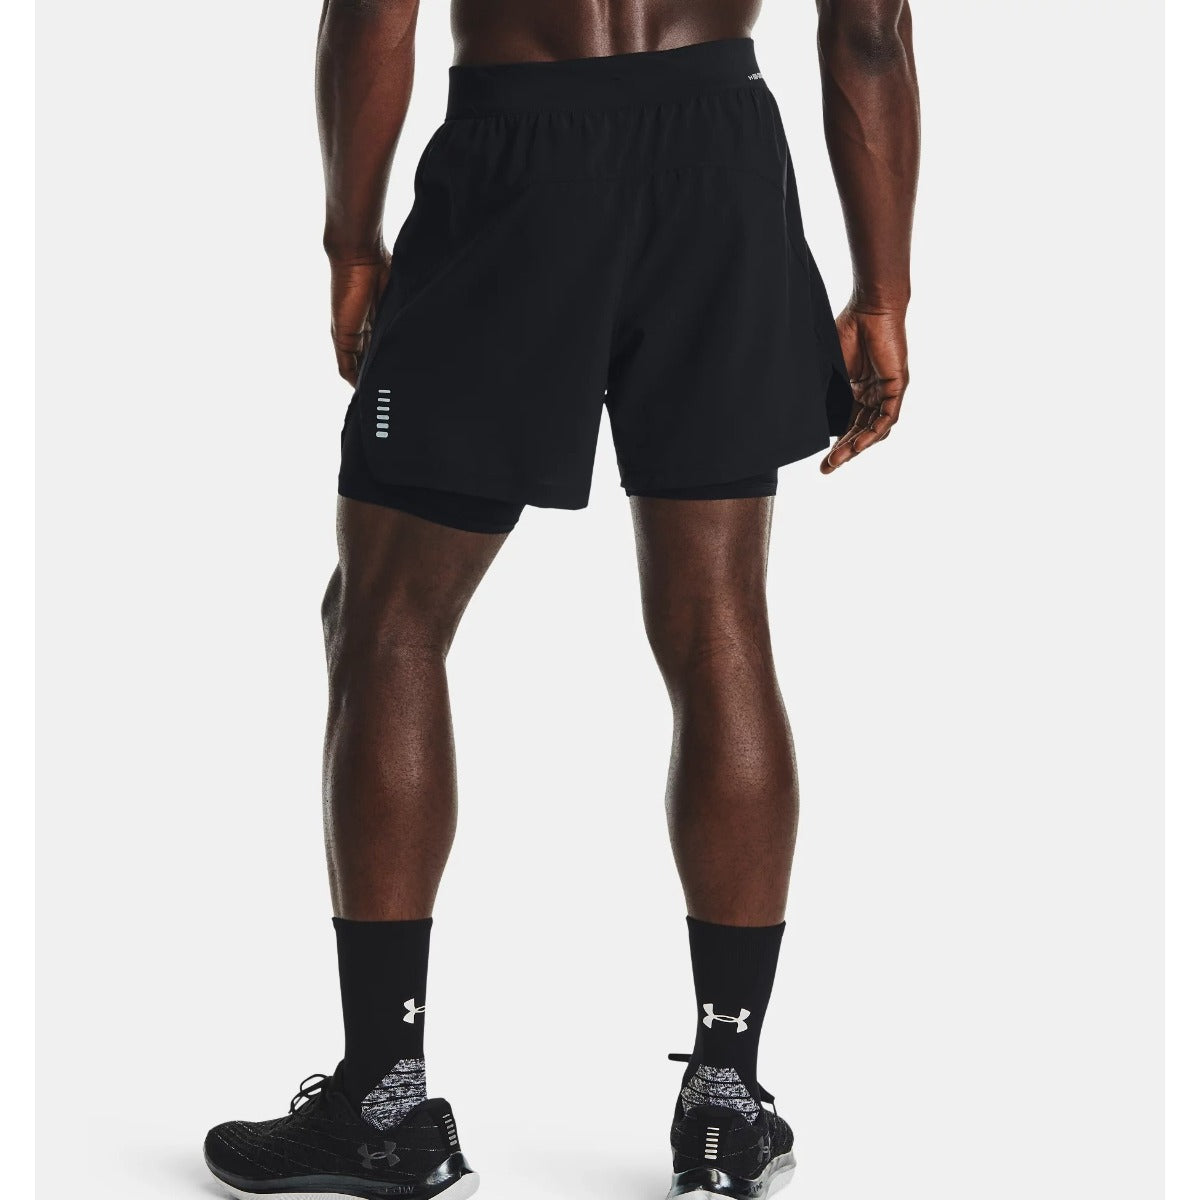 Under Armour Iso Run Chill 2 in 1 Shorts Men’s (Black 001)